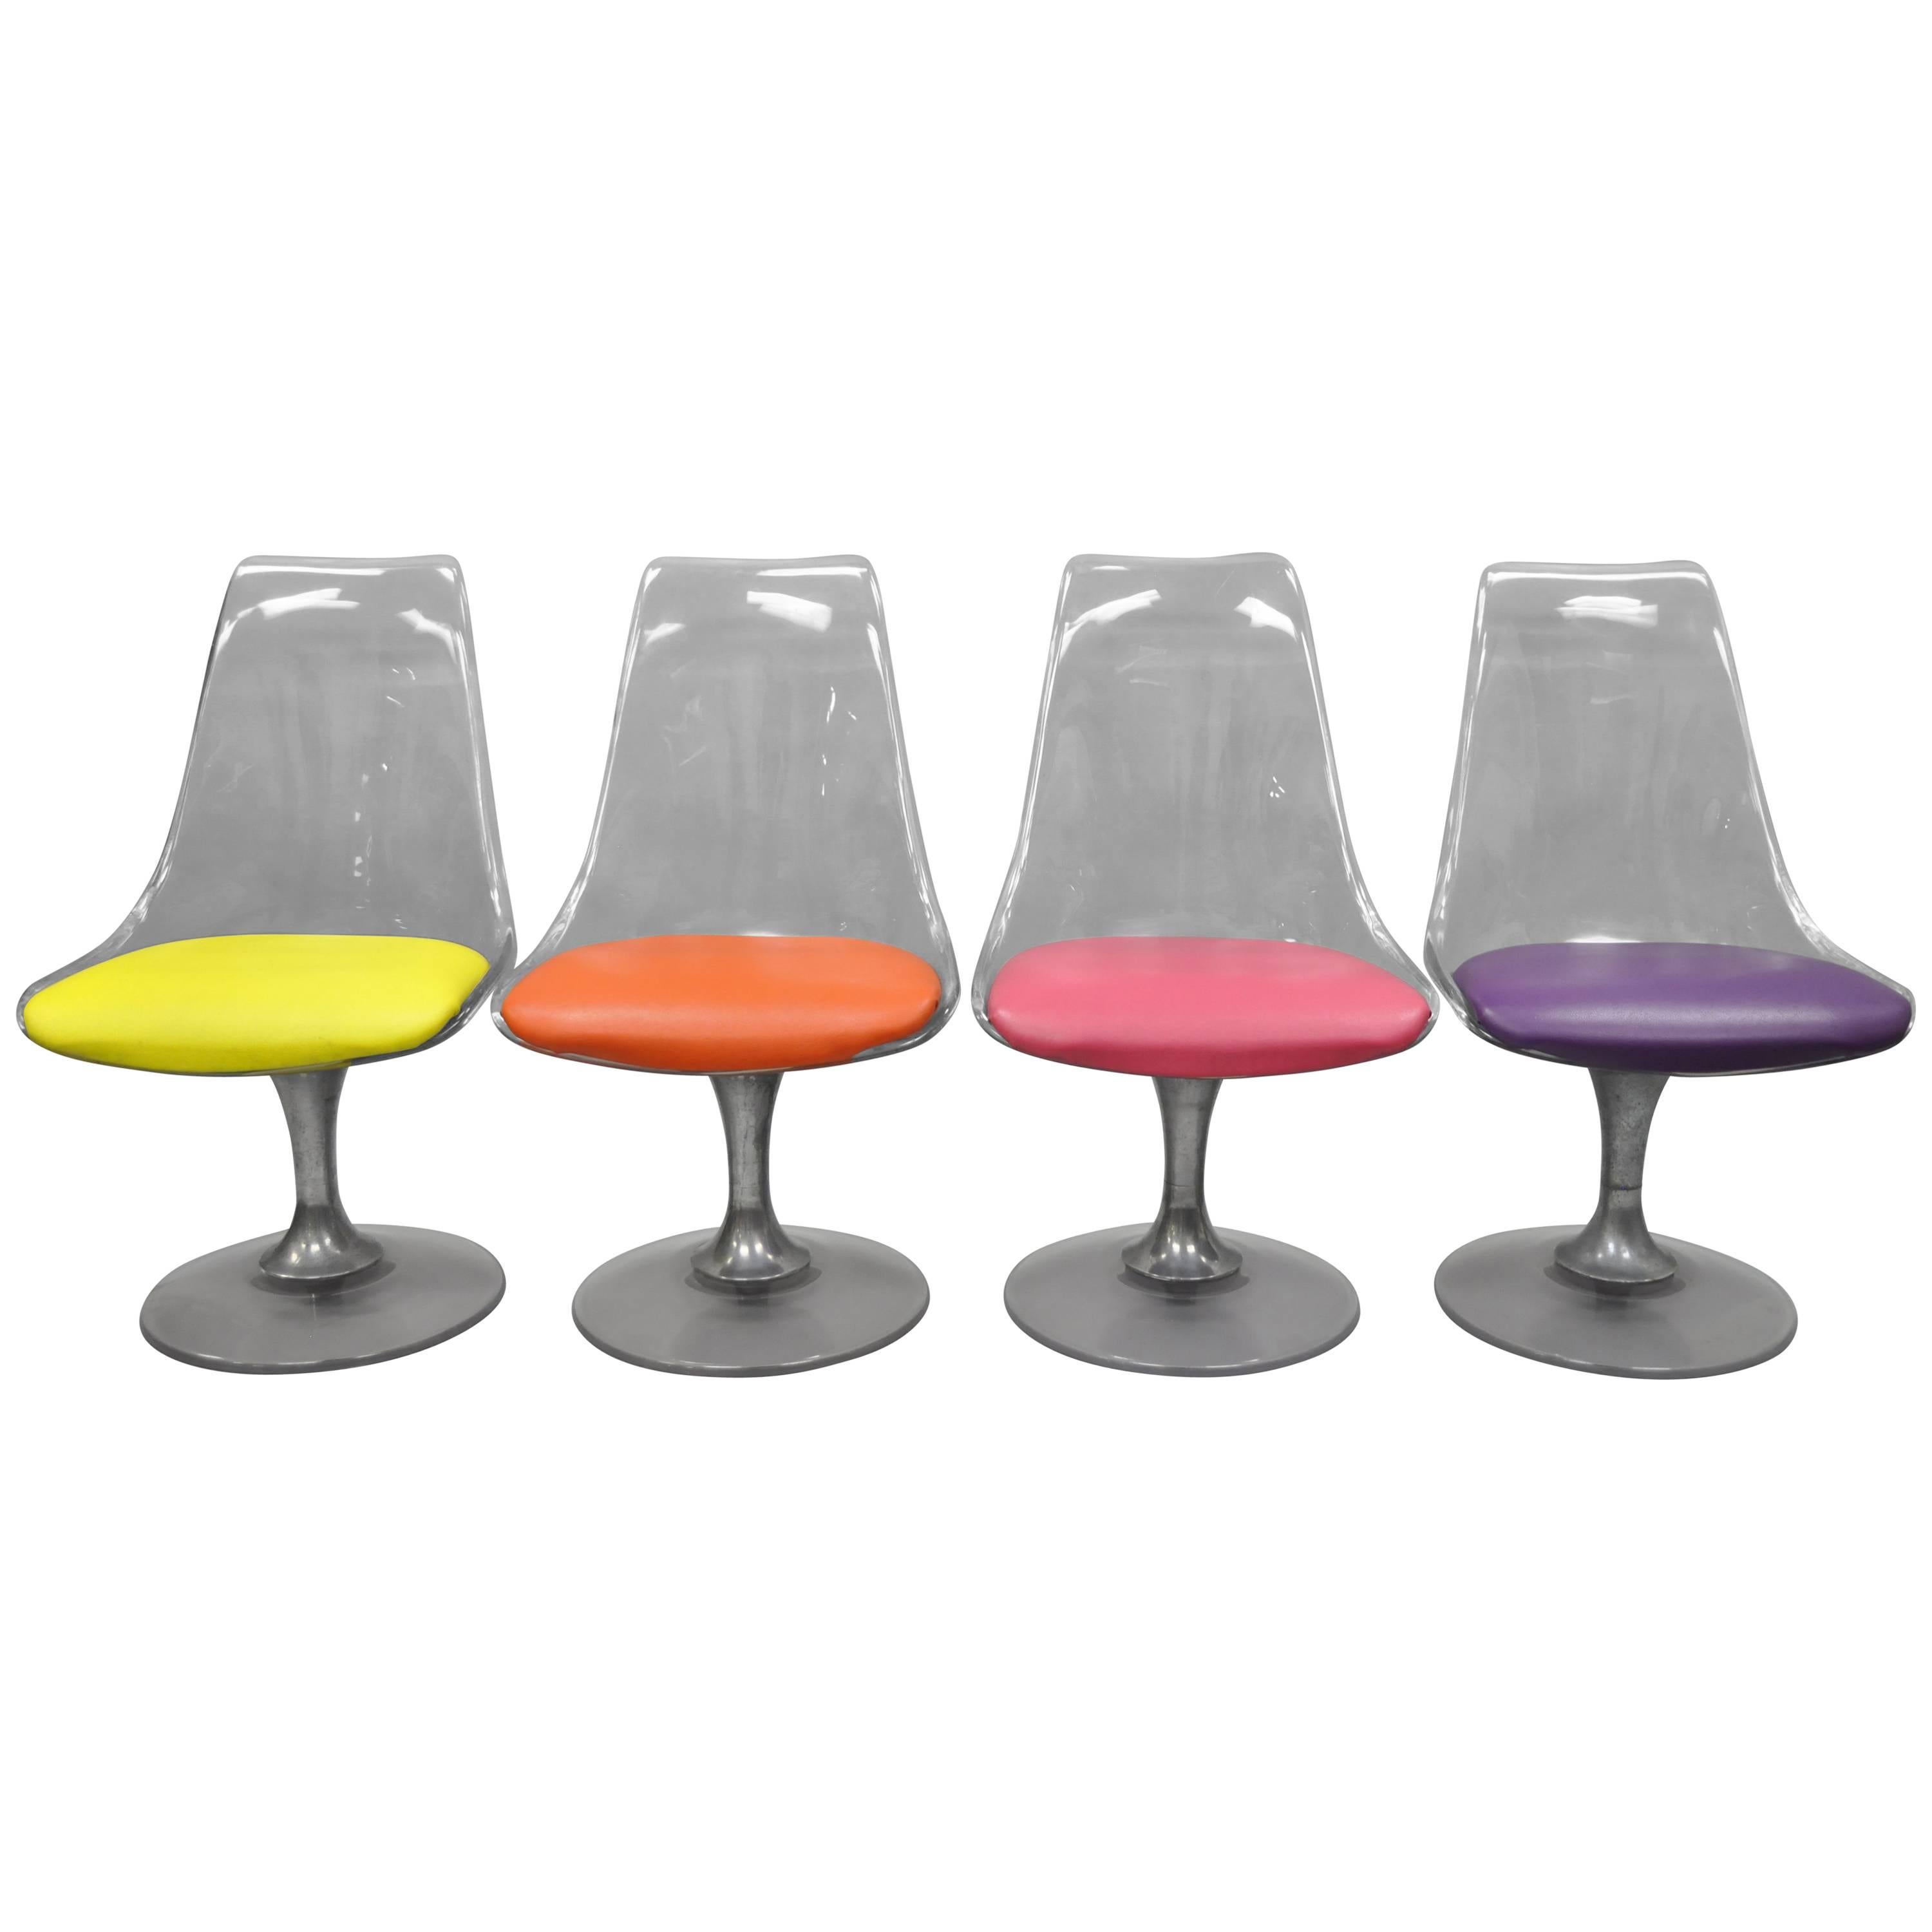 Four Lucite Chromcraft Tulip Swivel Dining Chairs Mid-Century Modern Colorful